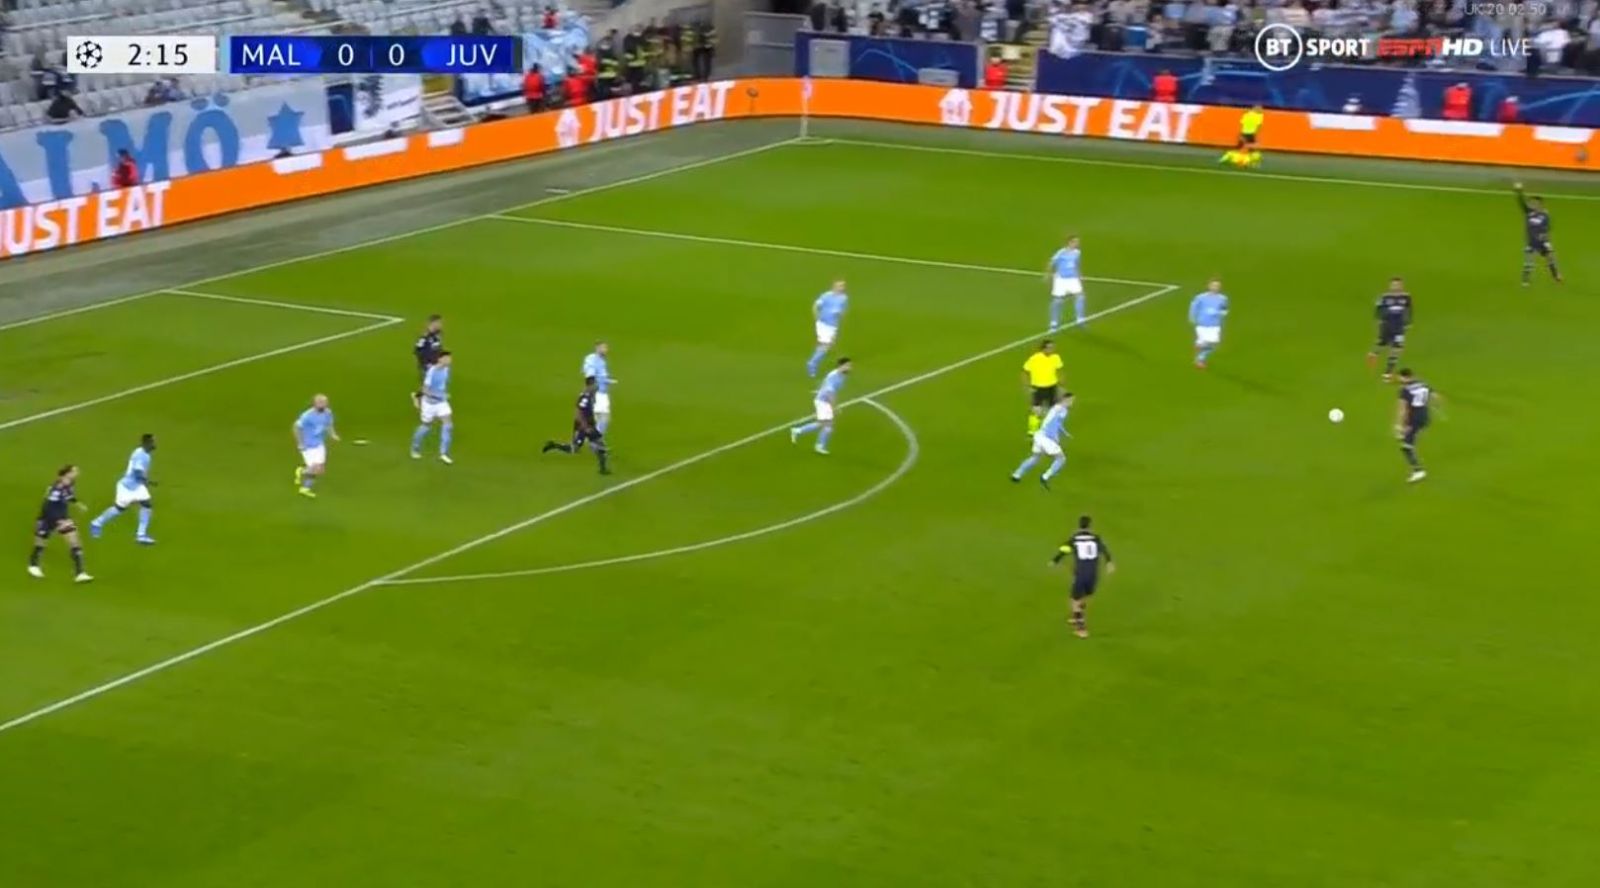 Malmo FF 0-3 Juventus 2021.09.14 (20h00) Watch Full Goals Highlight Extended (15 Minutes)